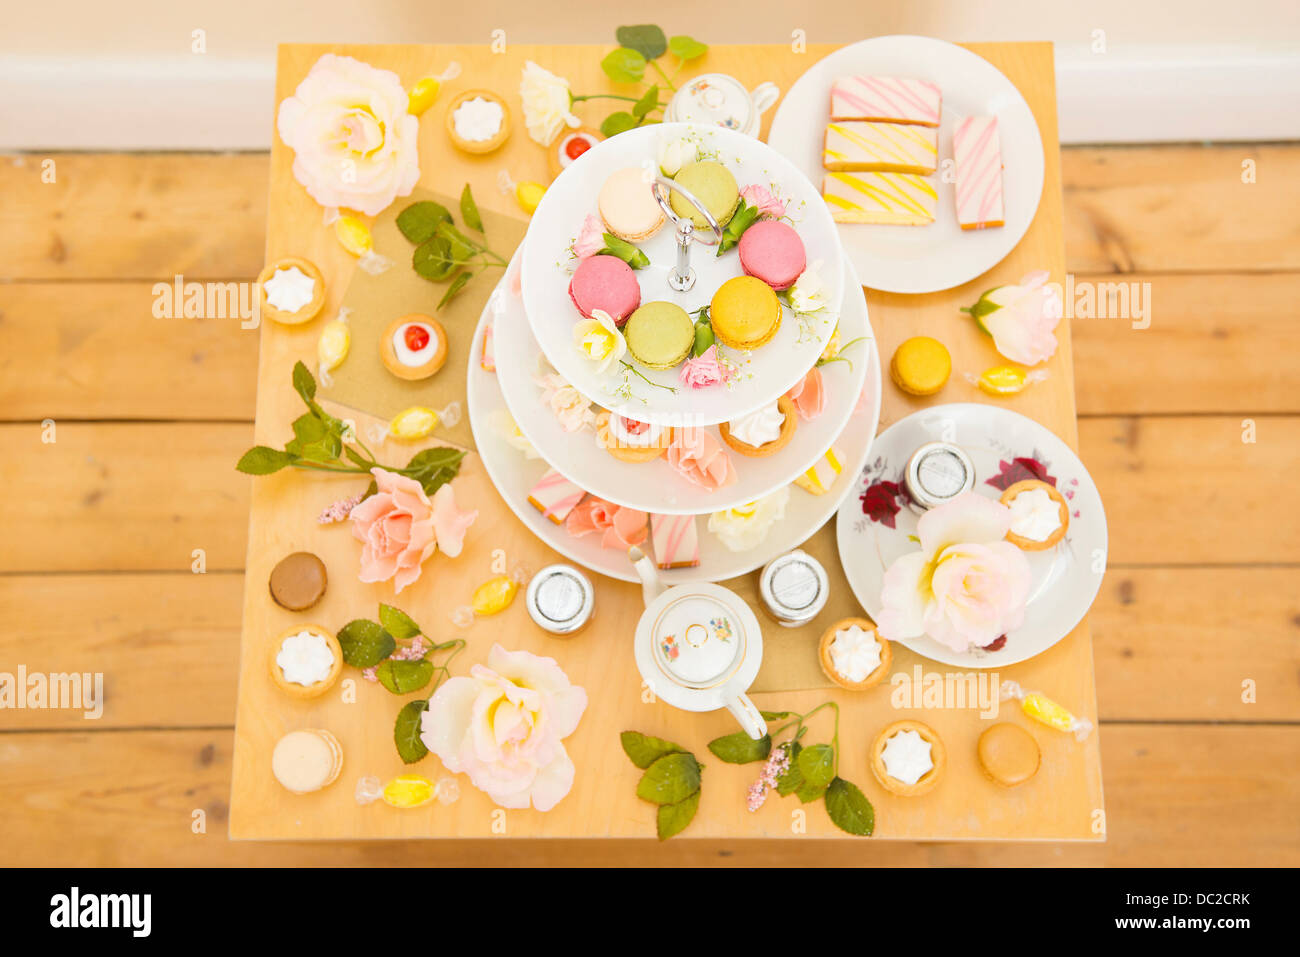 Table with assortment of cakes and confectionery Stock Photo